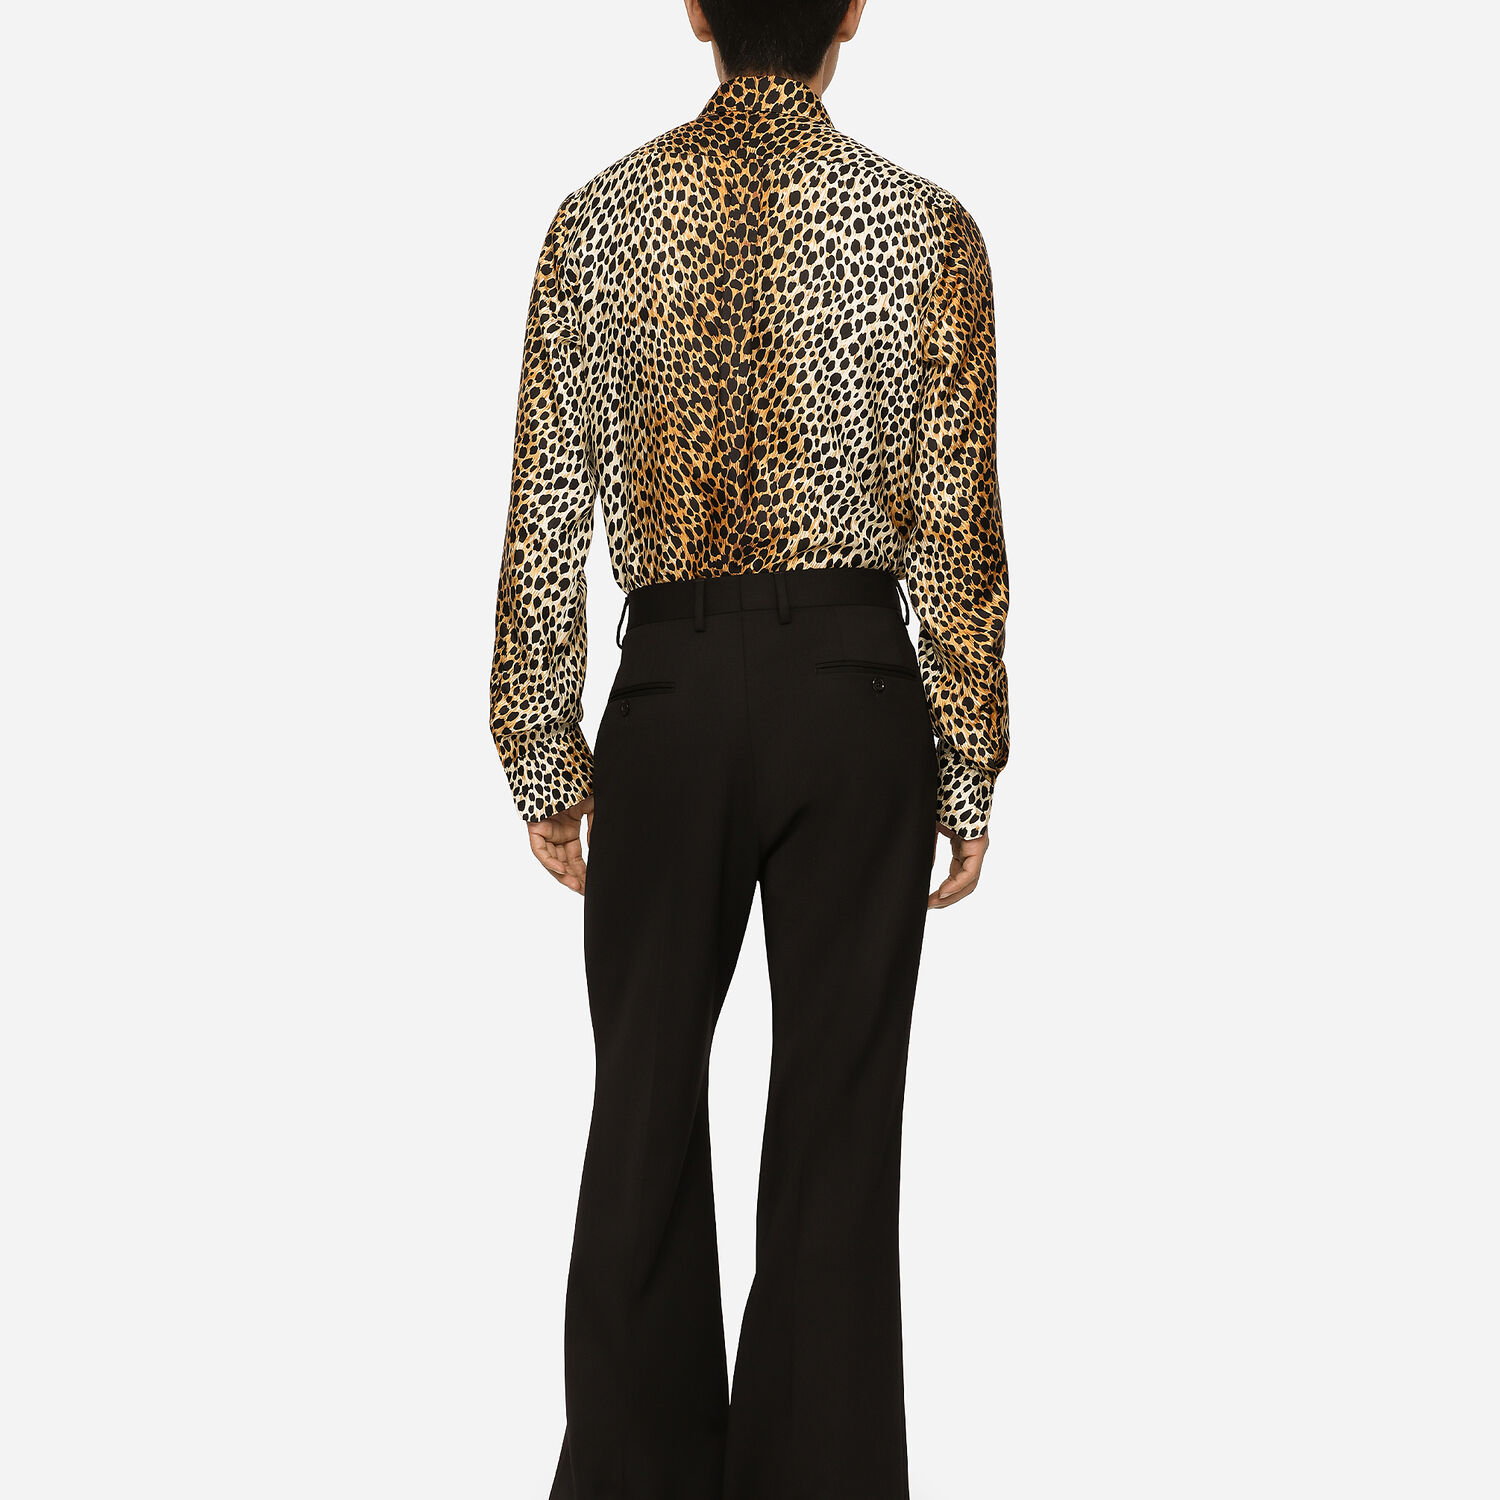 Multicolor for Silk Dolce&Gabbana® in print with shirt US ocelot | Martini-fit twill